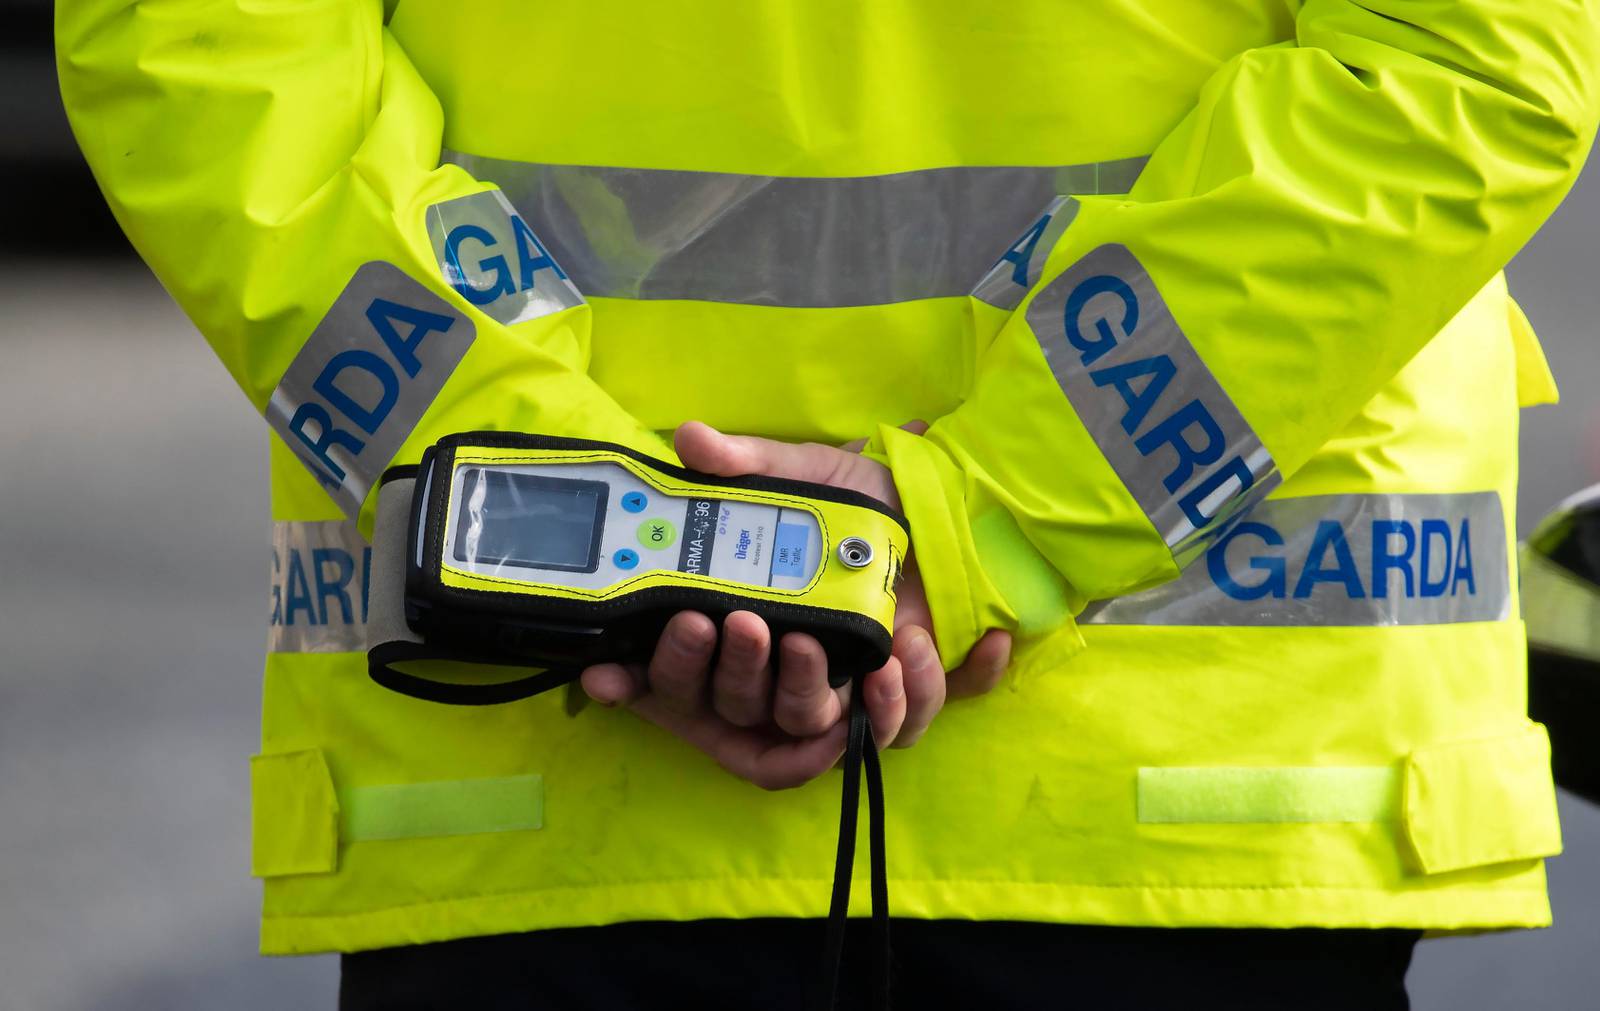 14/03/2022  A Garda with an intoxilyzer alcohol meter  pictured this morning at a Garda checkpoint on Chapelizod Road, Dublin  at the launch of an appeal by the Road Safety Authority (RSA) and An Garda Síochána for their St. Patrick’s Weekend Bank Holiday road safety appeal. The RSA and An Garda Síochána will focus their appeal on drink driving but particularly drink driving the morning after.....Picture Colin Keegan, Collins Dublin